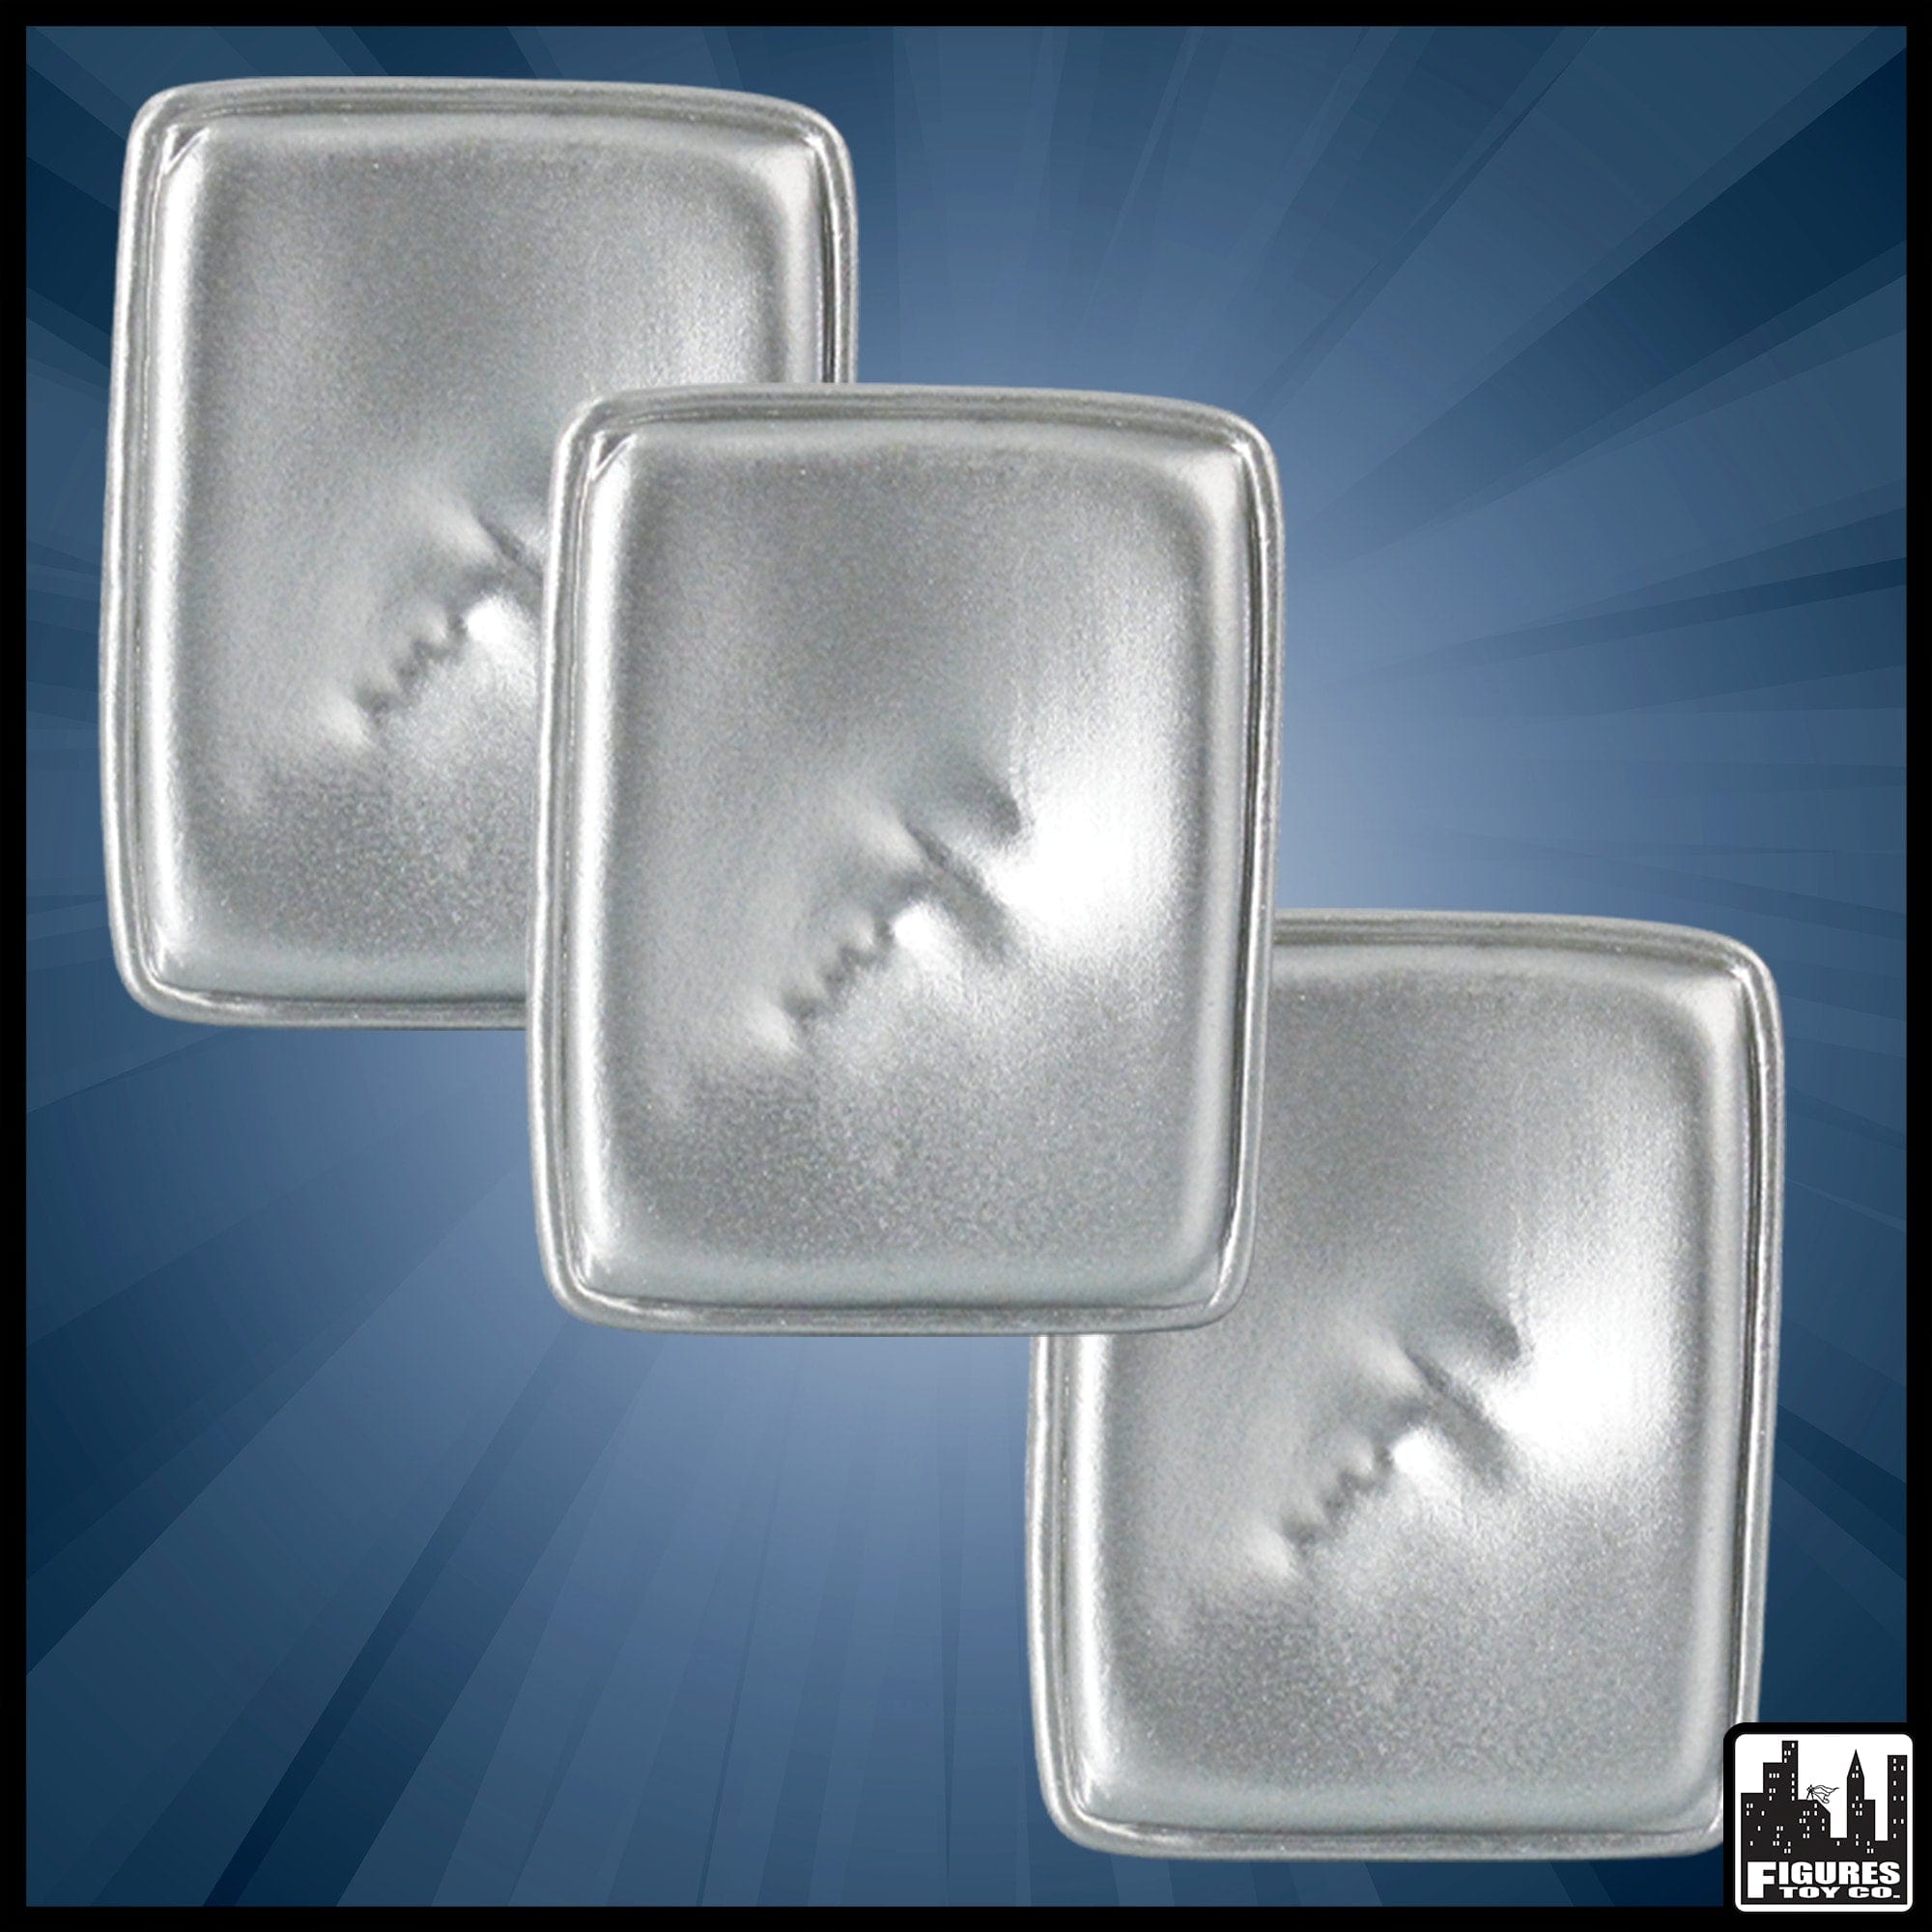 Set of 3 Silver Tray's with Smashed Faces for WWE Wrestling Action Figures